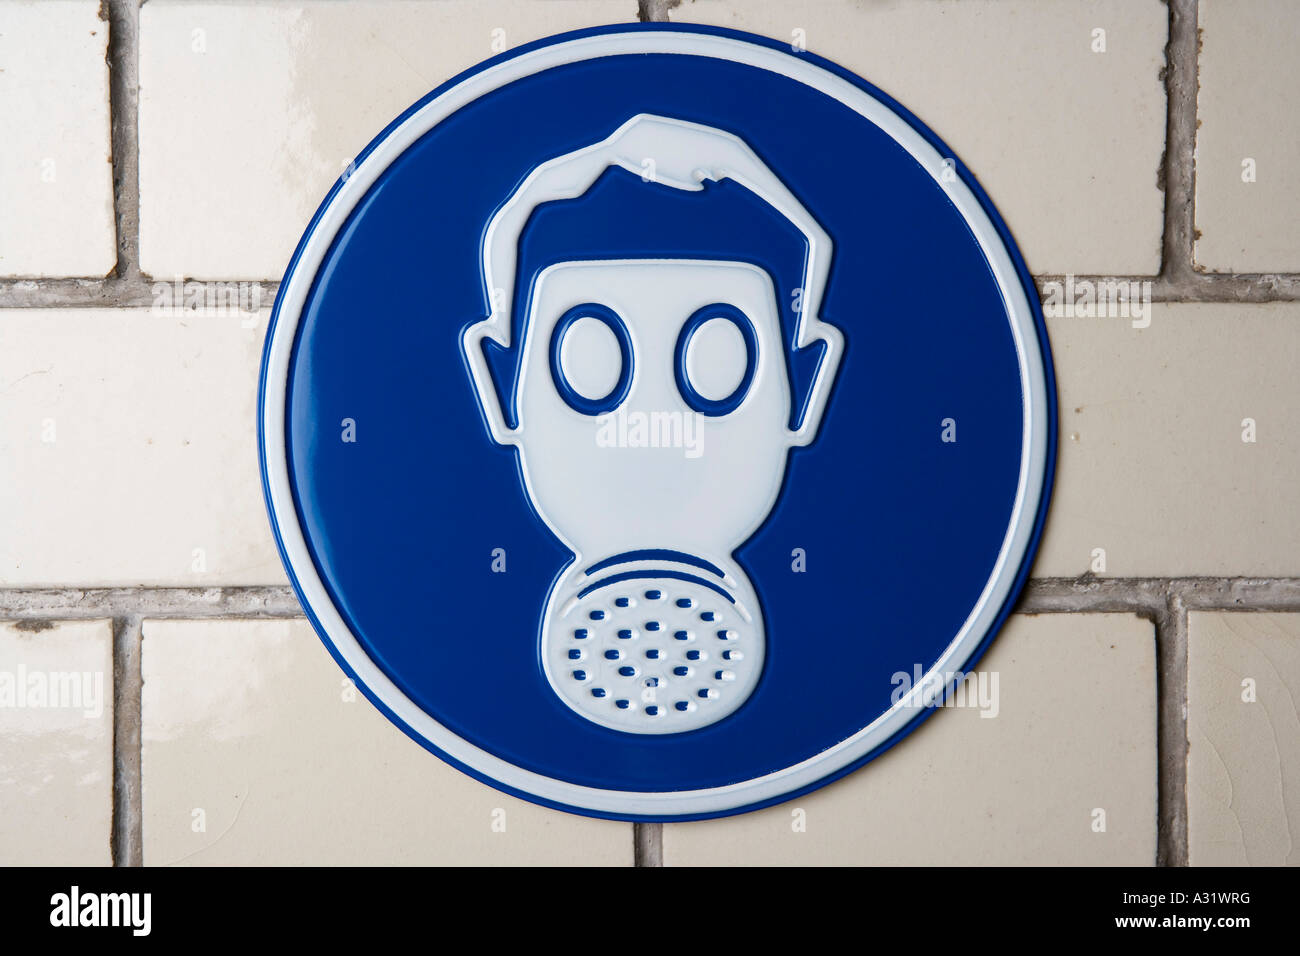 Wear protective mask information sign Stock Photo